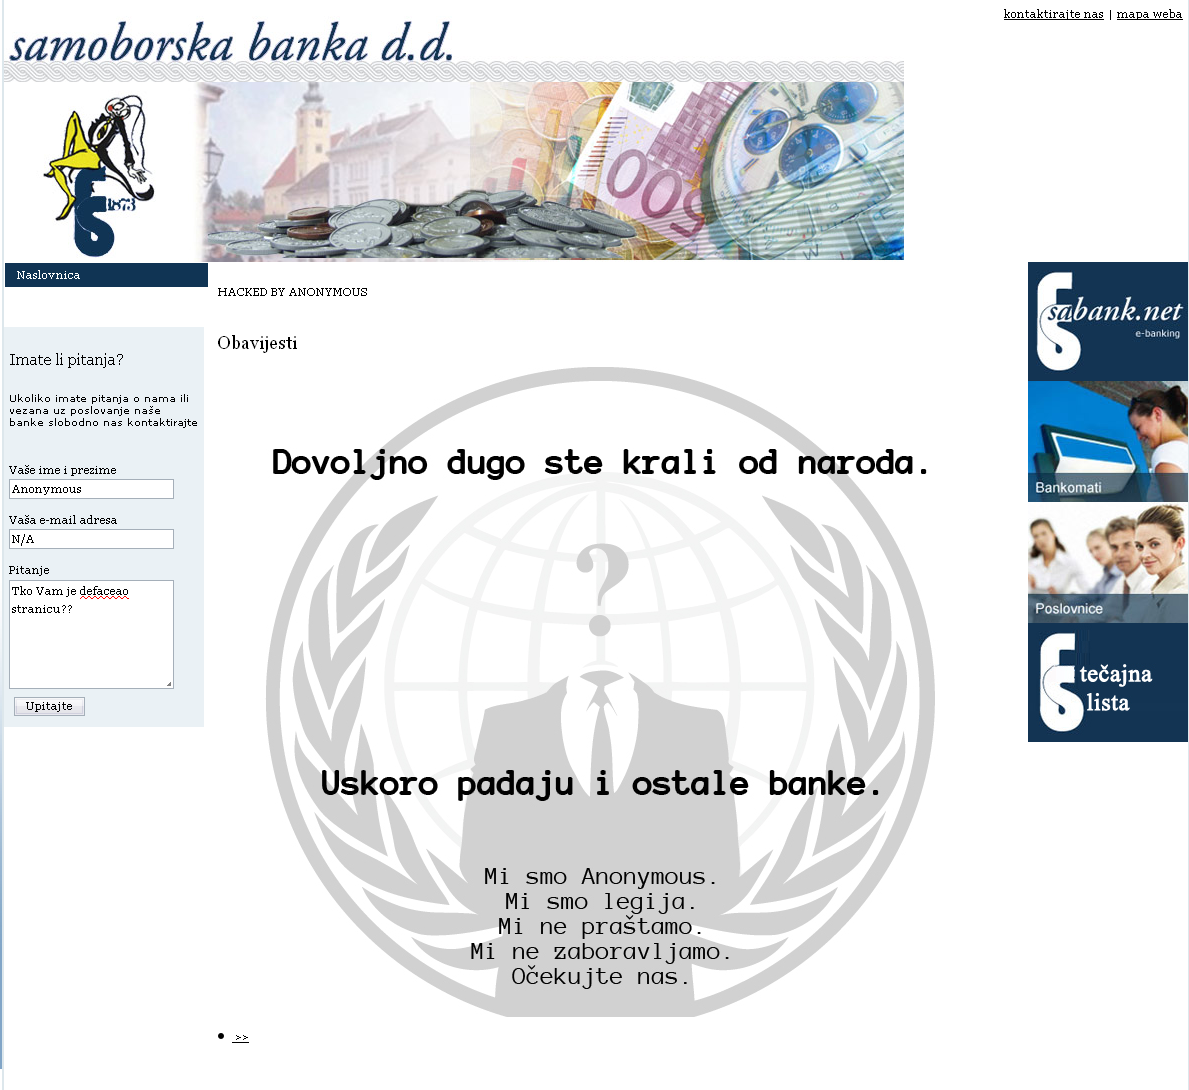 Croatian Banks hacked by Anonymous